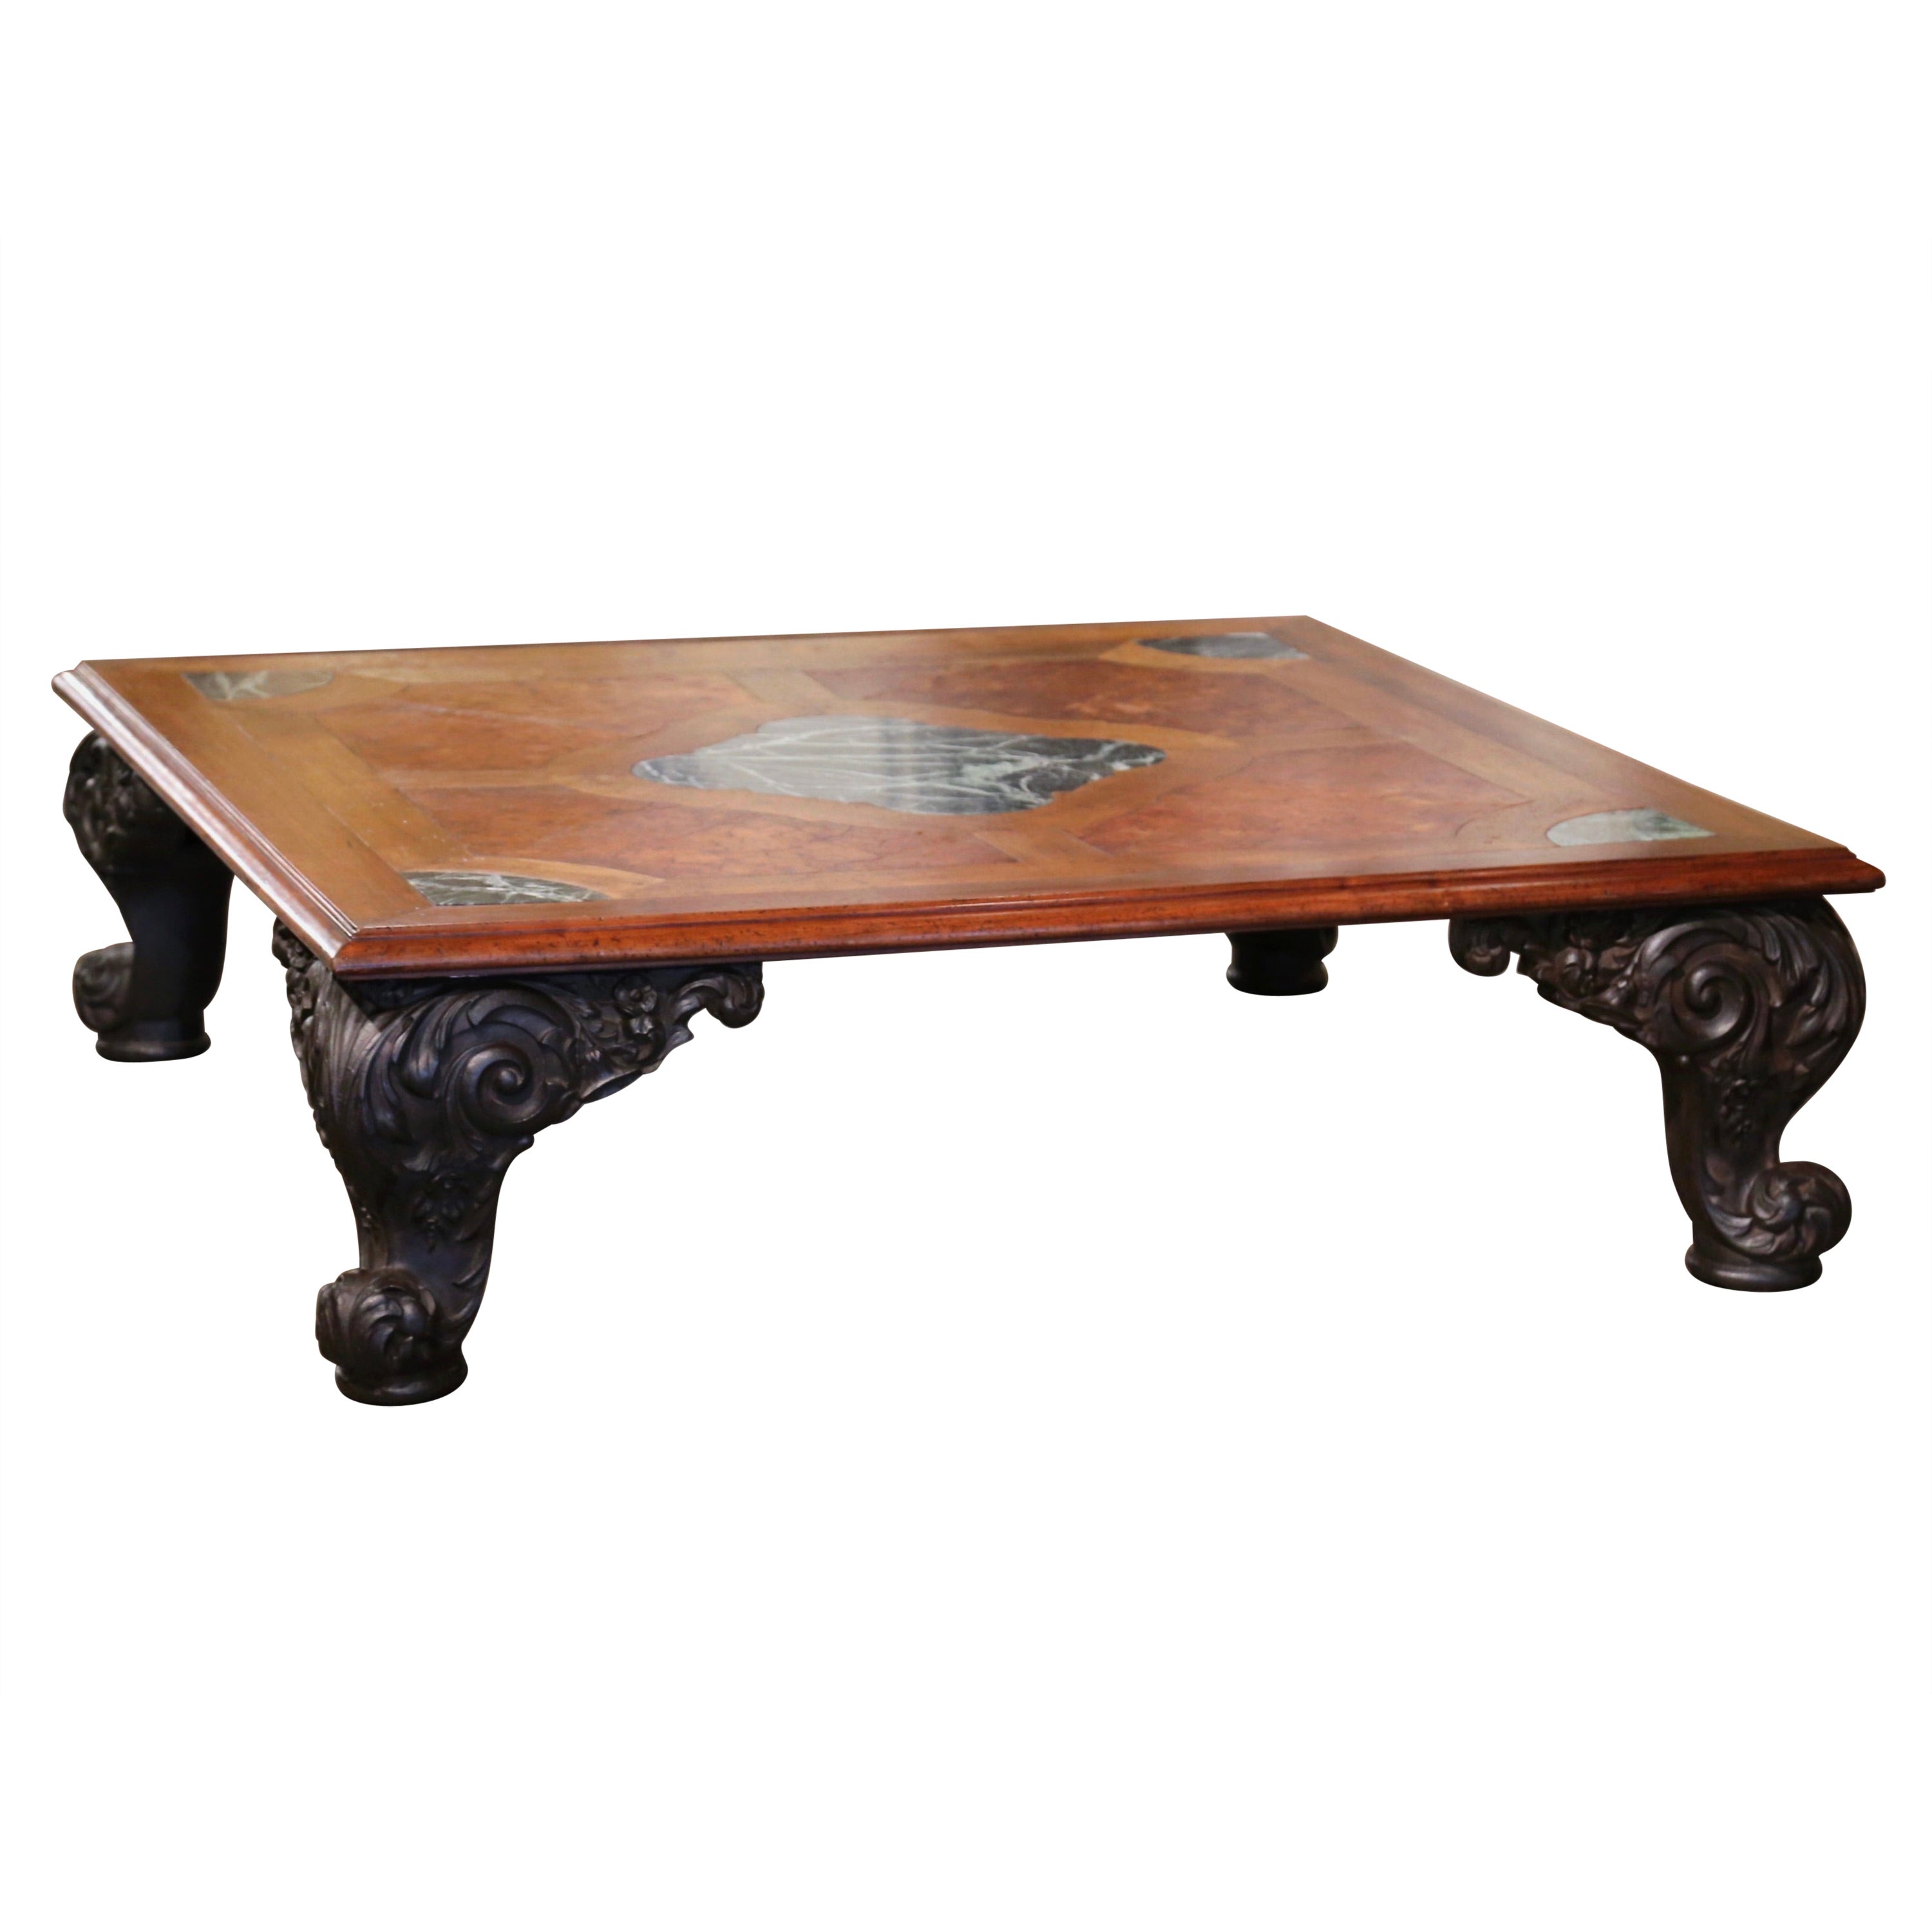 Mid-Century French Regence Marquetry Walnut and Marble Coffee Table on Iron Legs